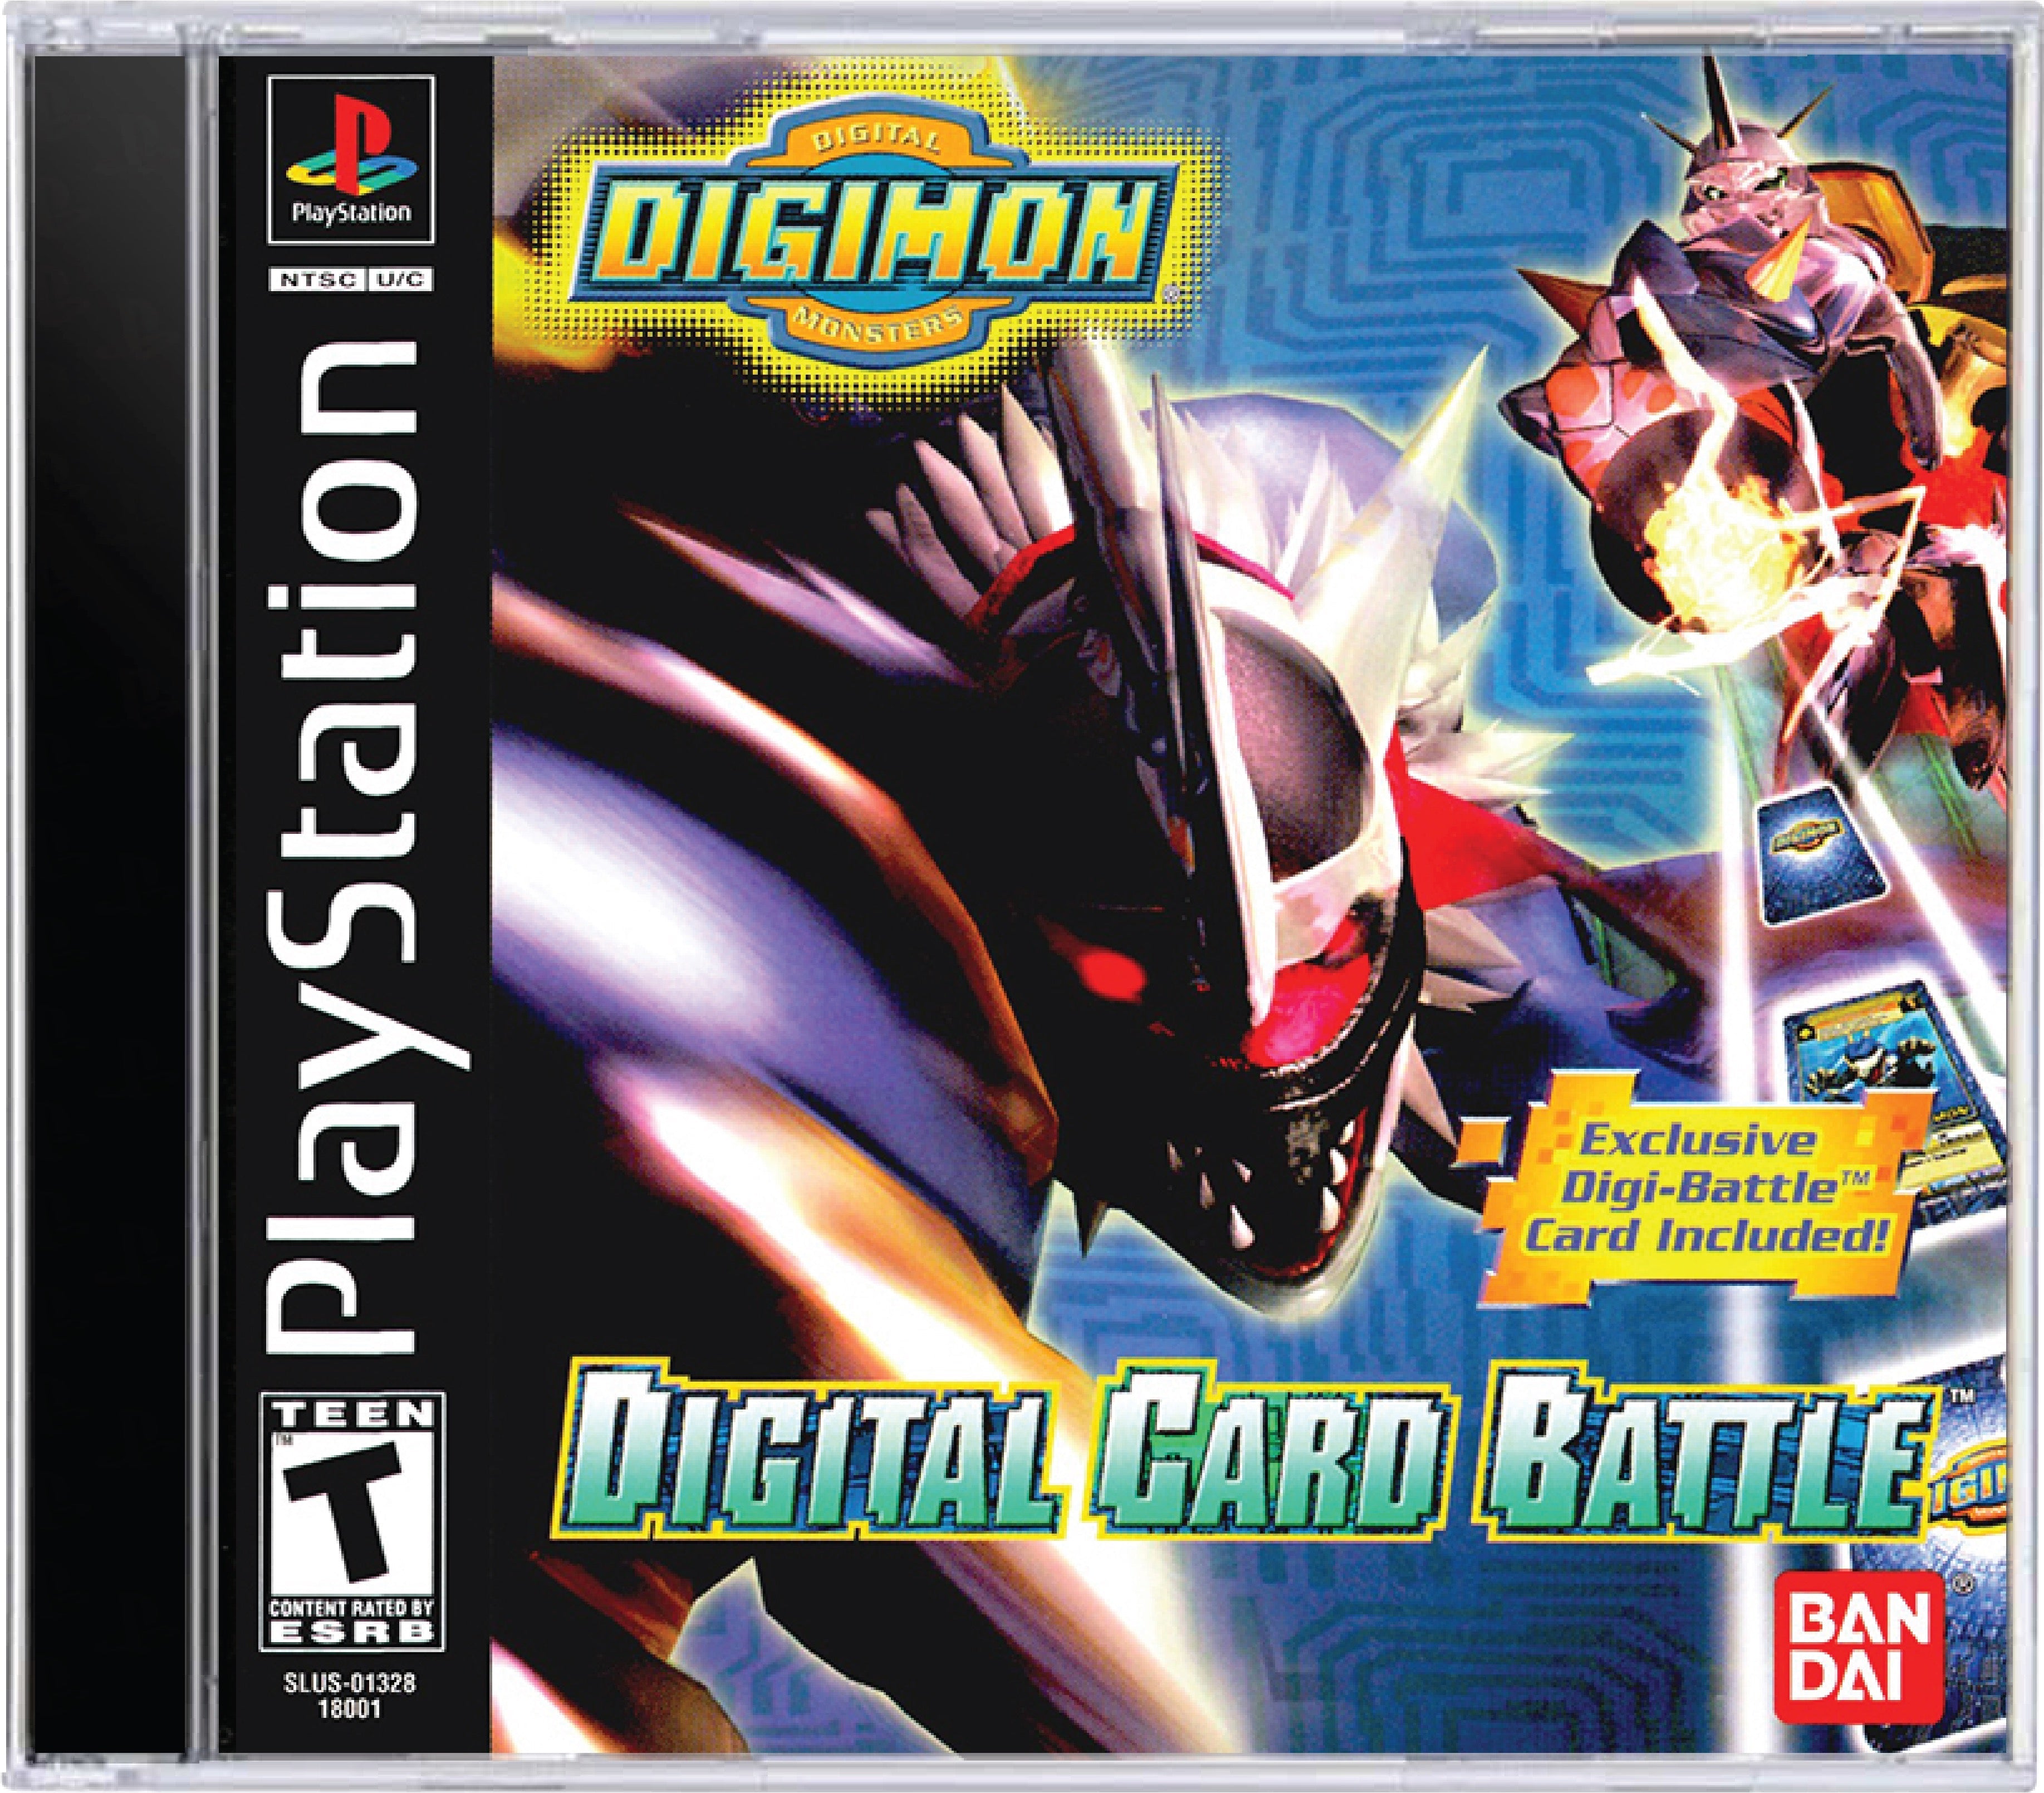 Digimon Digital Card Battle Cover Art and Product Photo